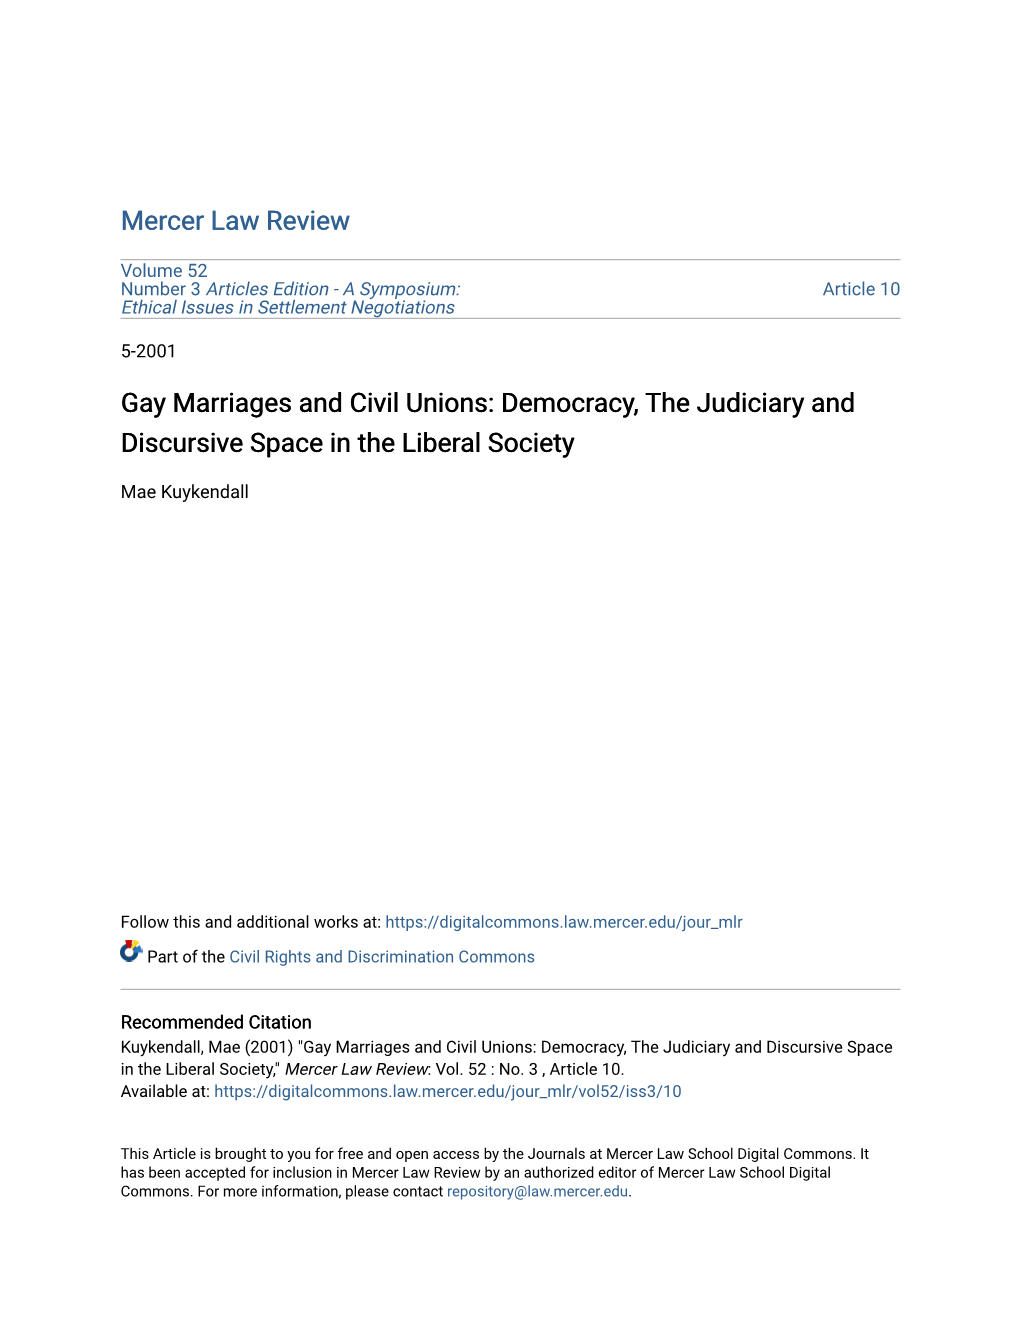 Gay Marriages and Civil Unions: Democracy, the Judiciary and Discursive Space in the Liberal Society